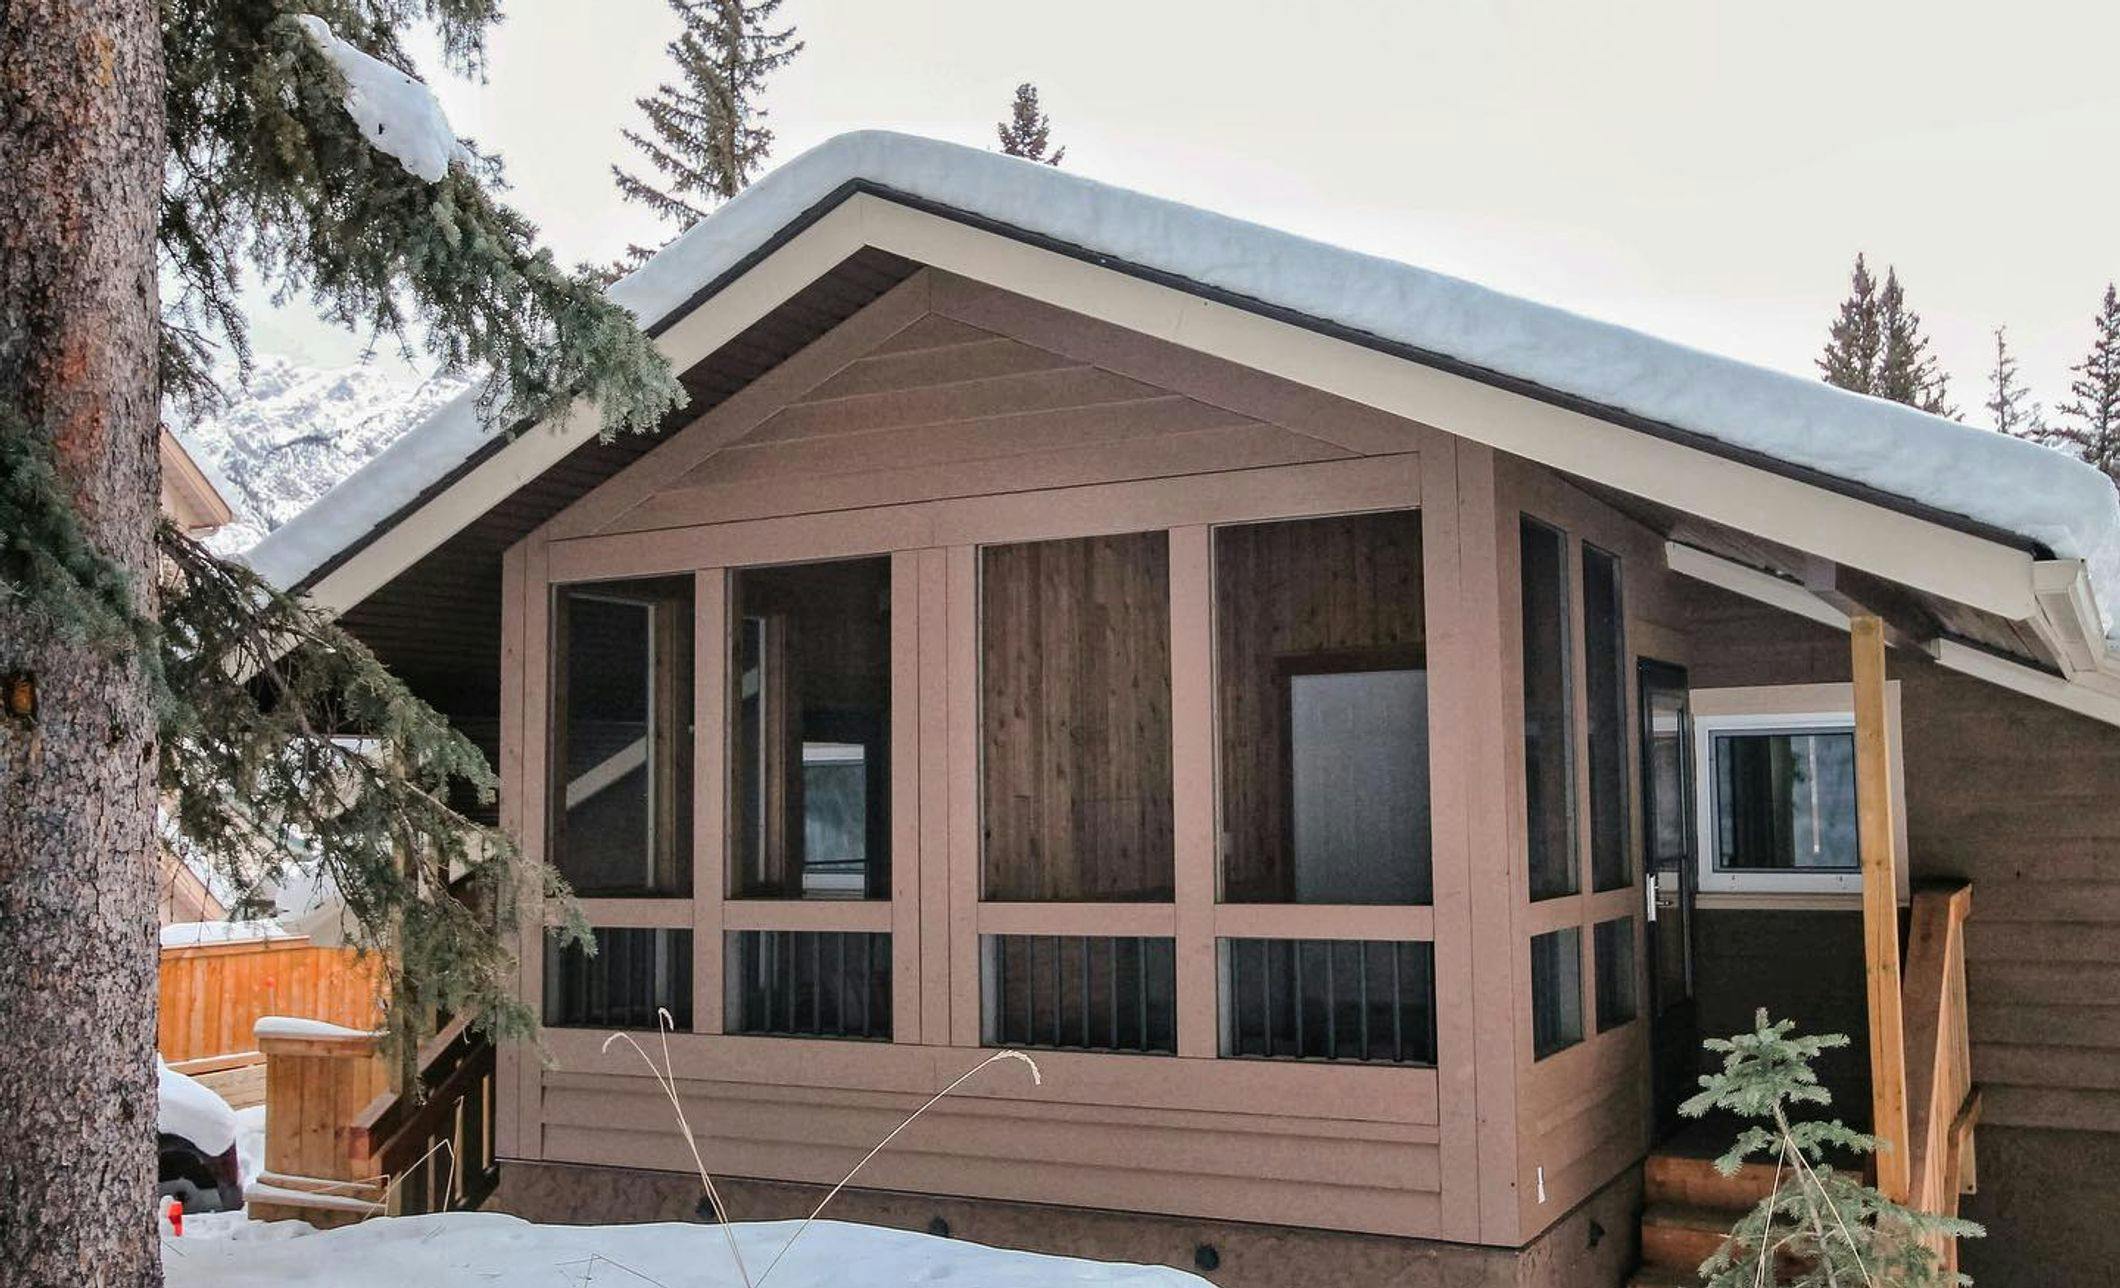 Cabin-style accommodation with a covered front porch, surrounded by snow